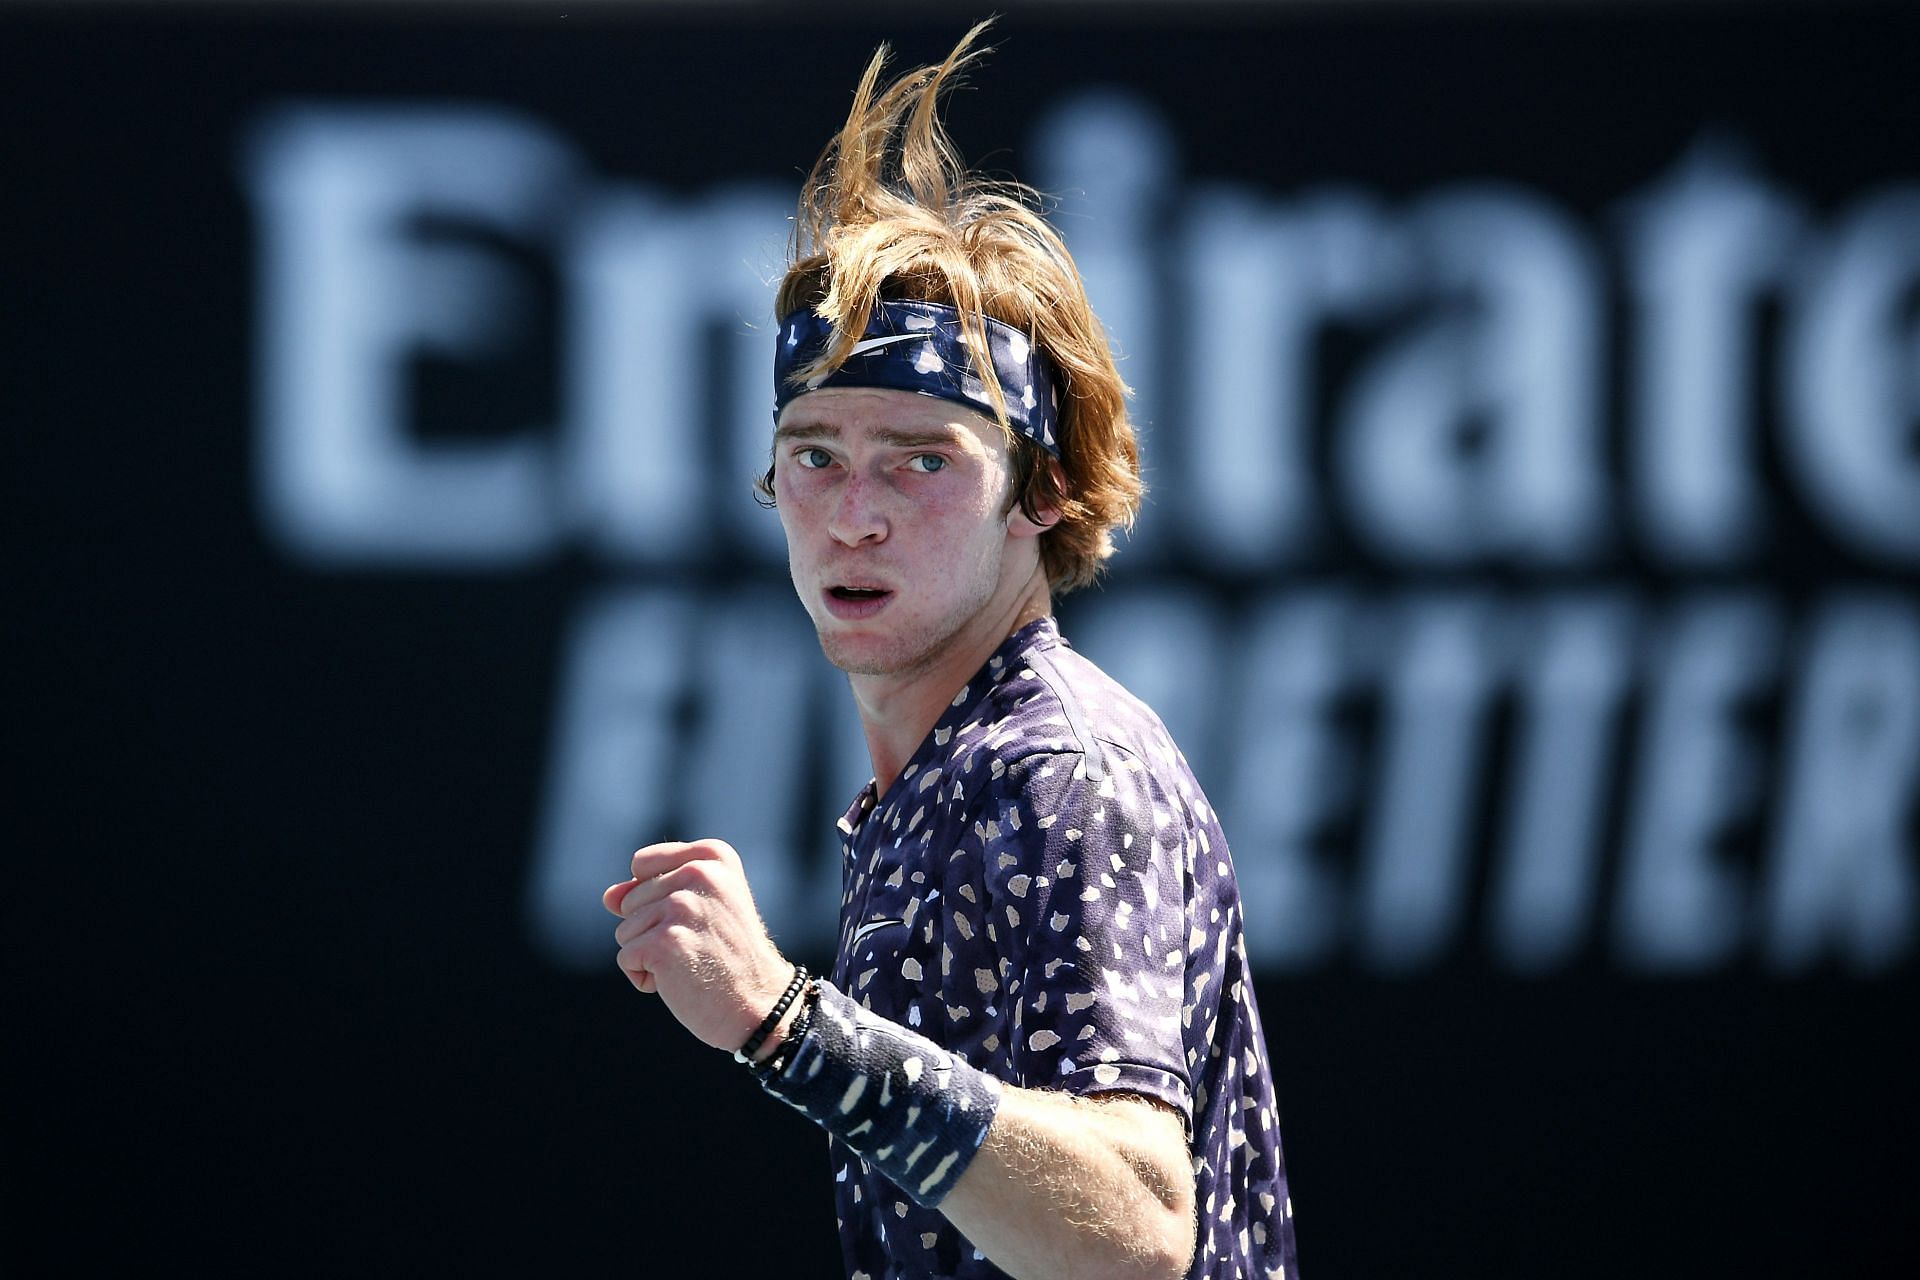 Rublev at the 2020 Australian Open.